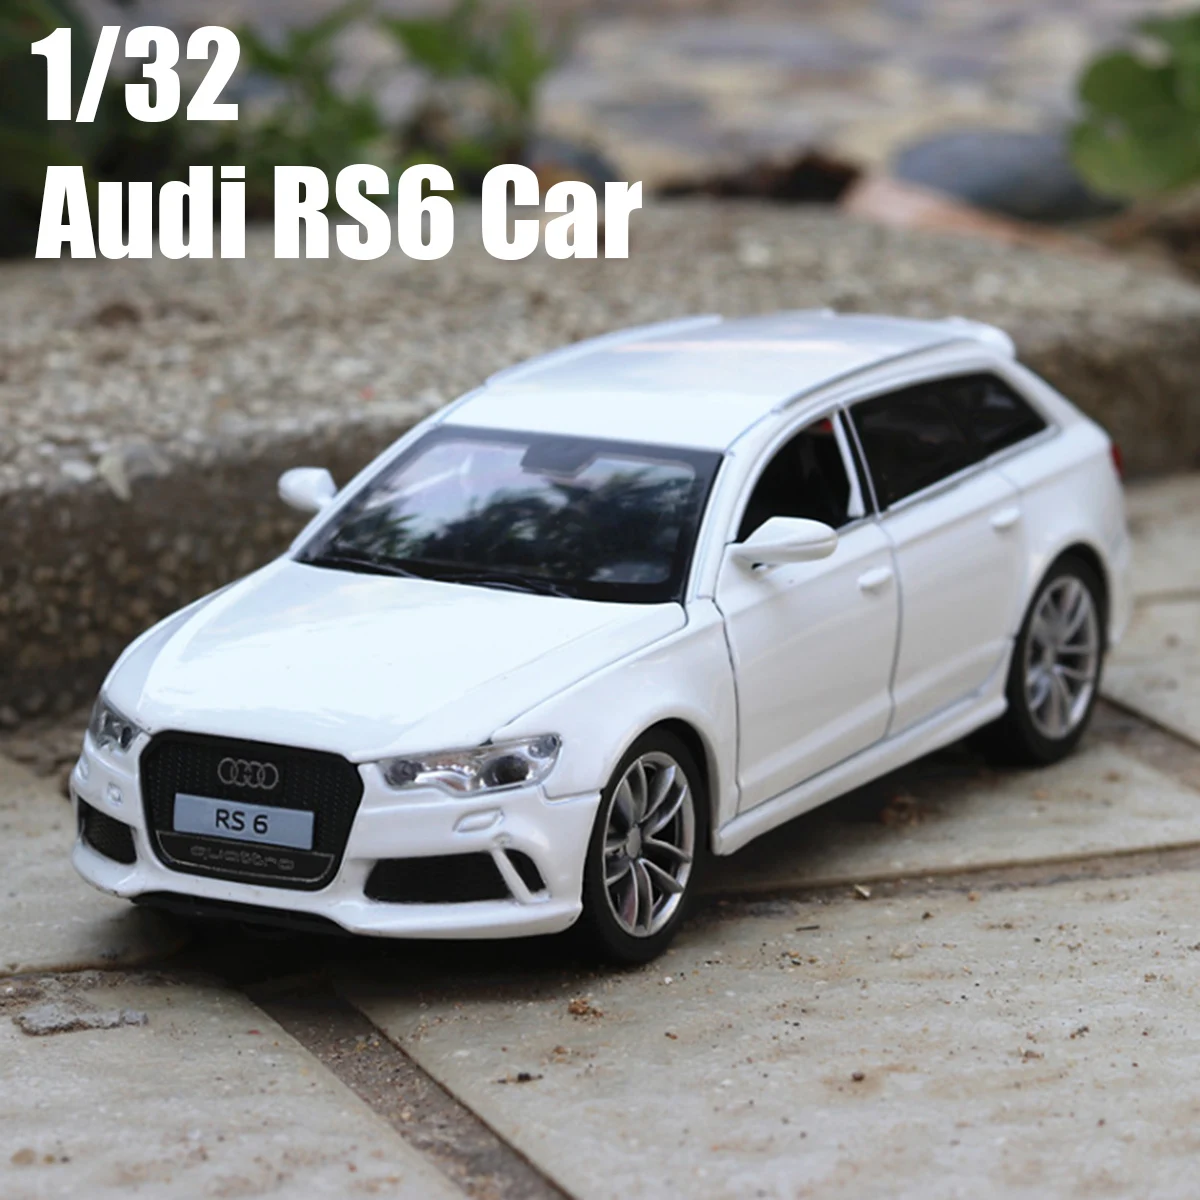 

1:32 1:36Audi RS6 Alloy Car Model Die Cast Toy With Pull Back Sound Children's Toy Collectibles Free Shipping Original Box